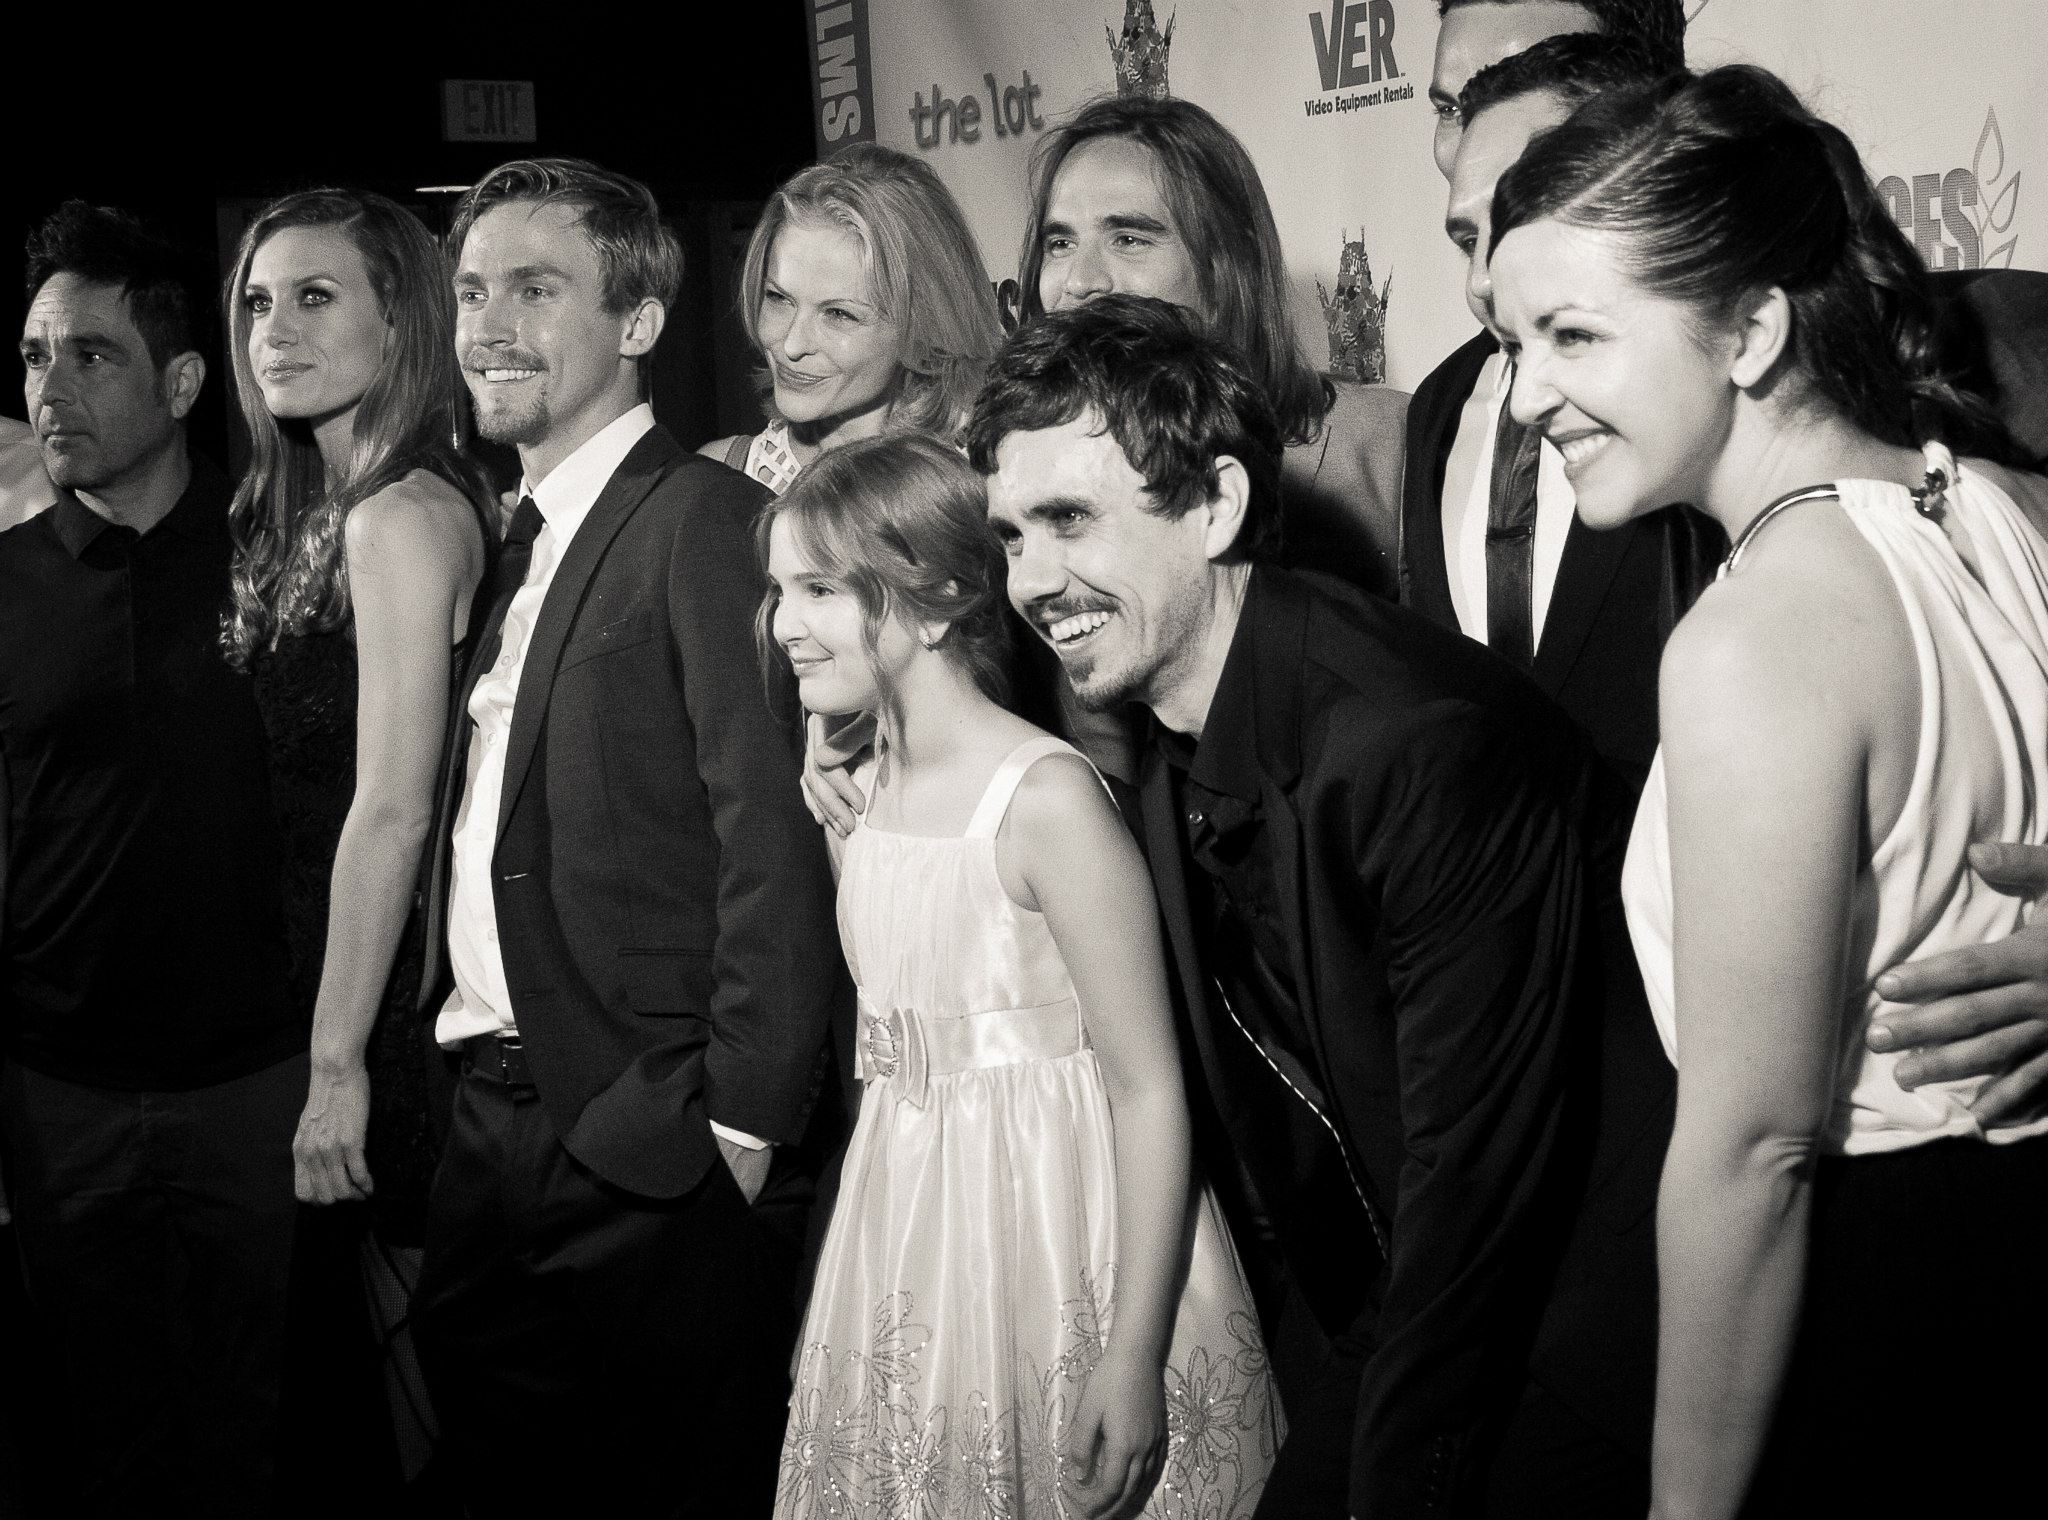 'The Toy Soldiers' World Premiere at Dances With Films - Hollywood's Chinese Theatres - June 2014. With cast.